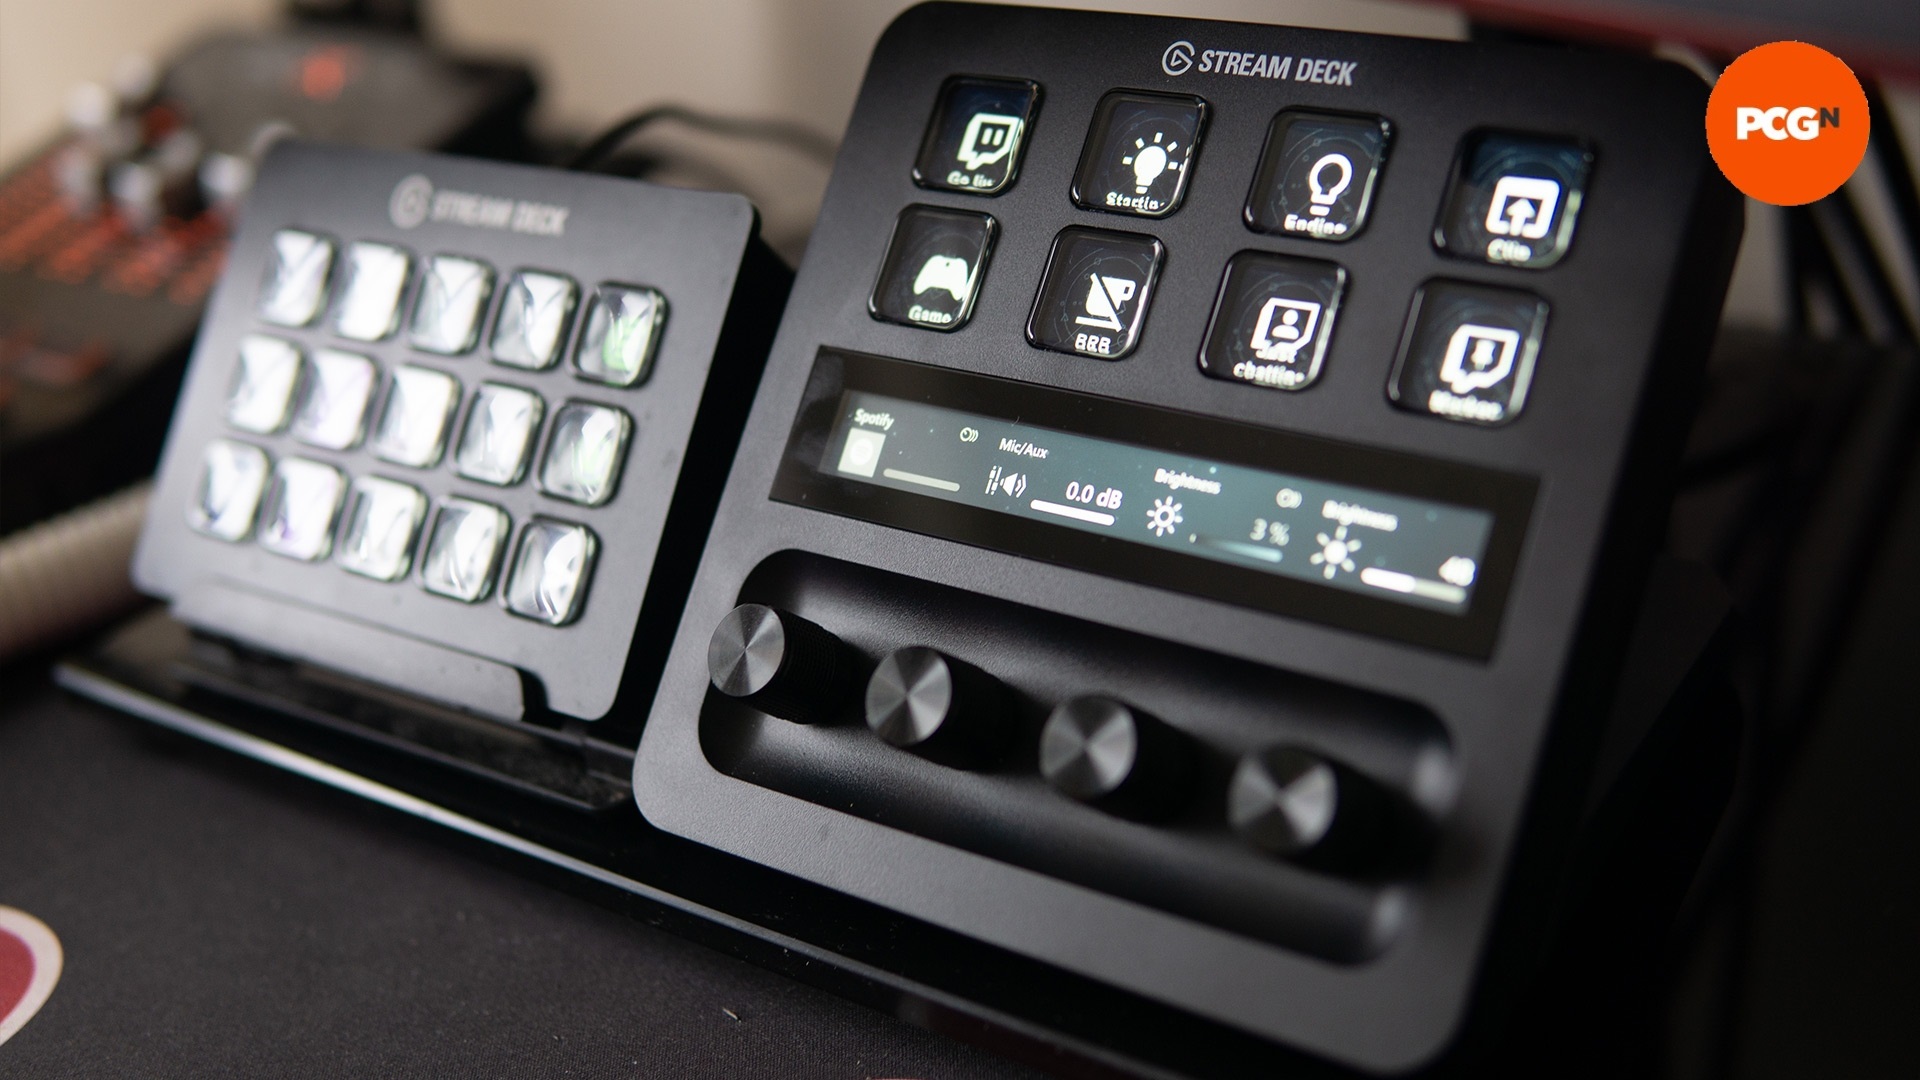 Elgato Stream Deck plus review image showing the product at an angle from the side.